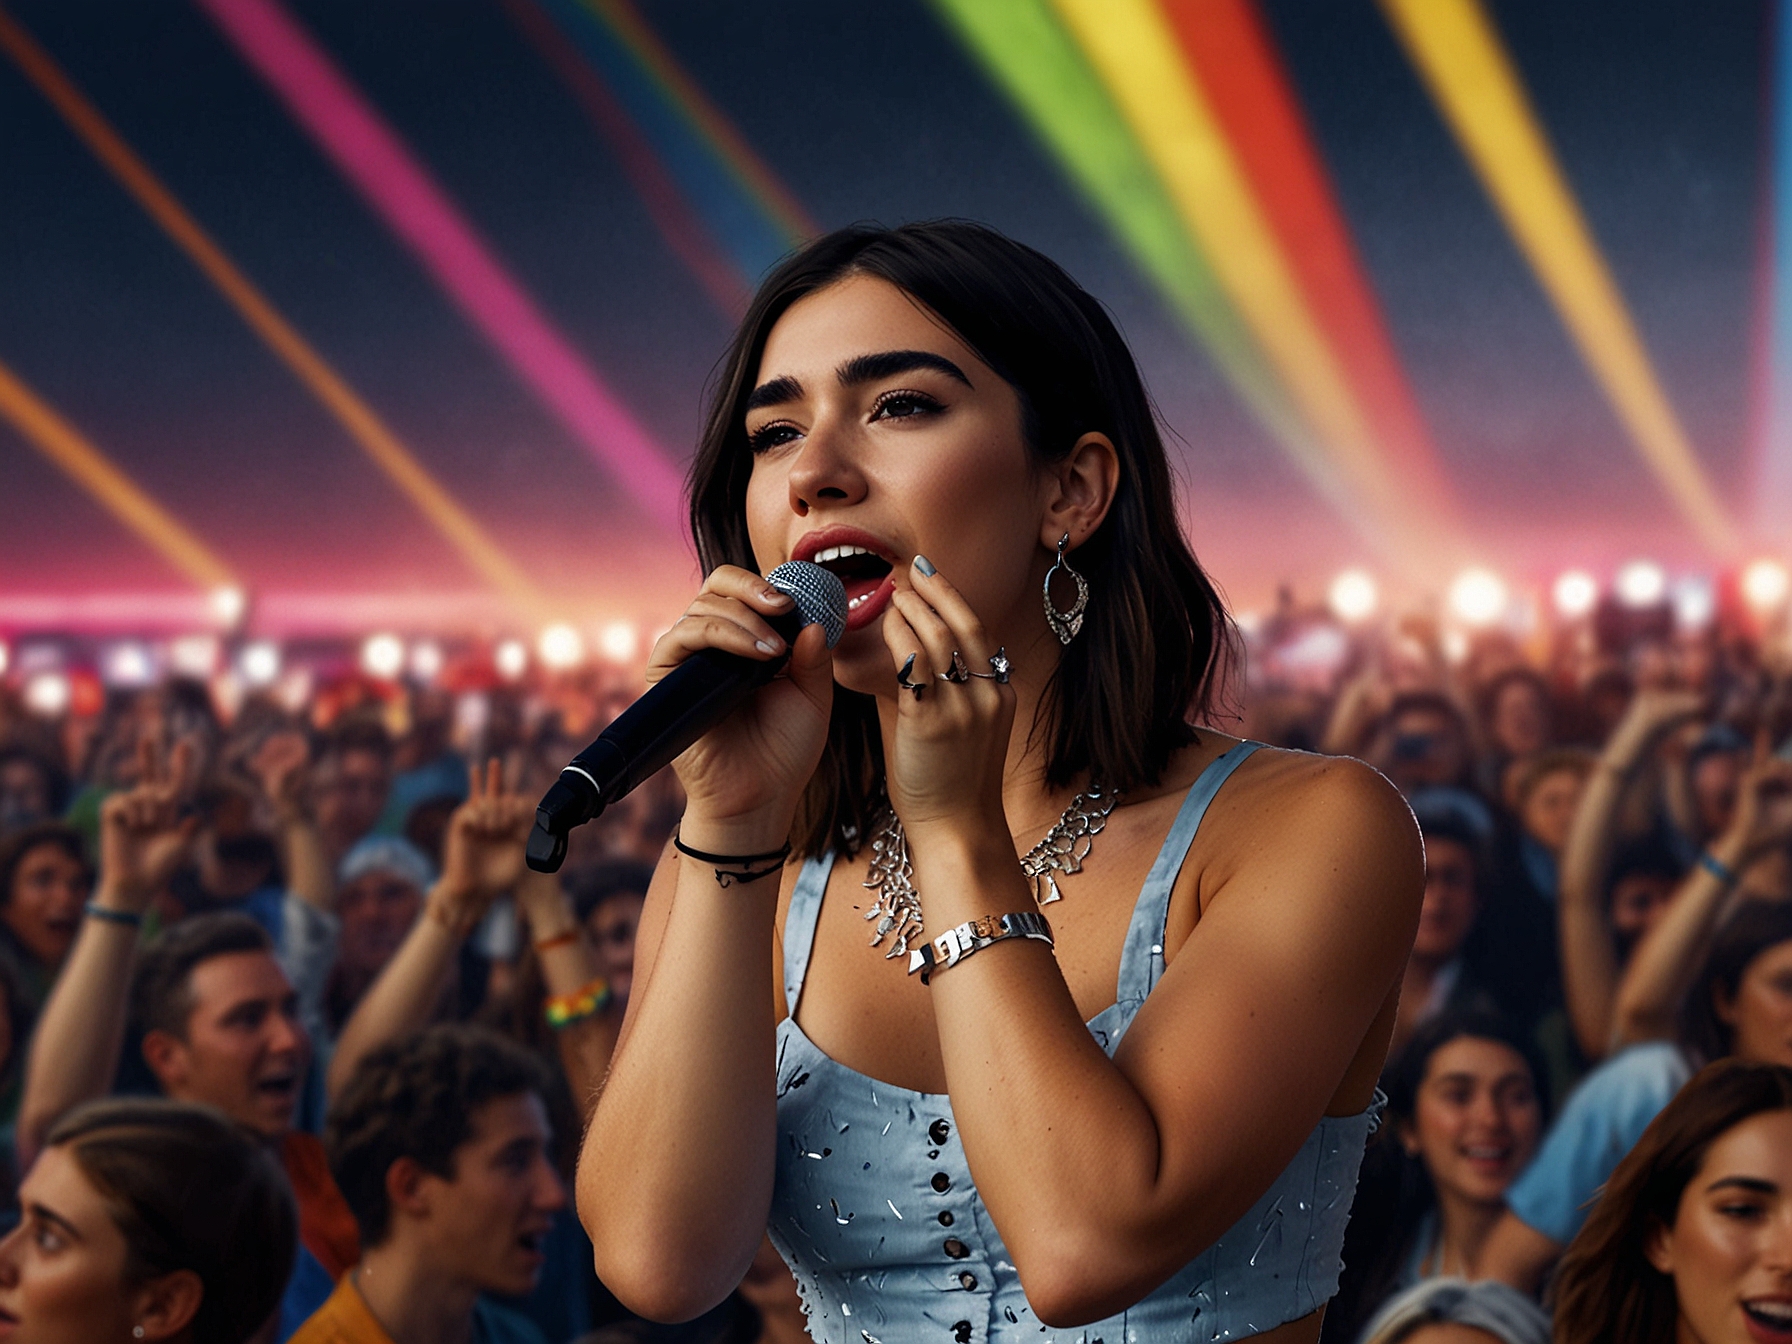 Dua Lipa on the Pyramid Stage at Glastonbury, singing passionately with colorful stage lights and an ecstatic crowd, capturing the raw energy of her headline performance.